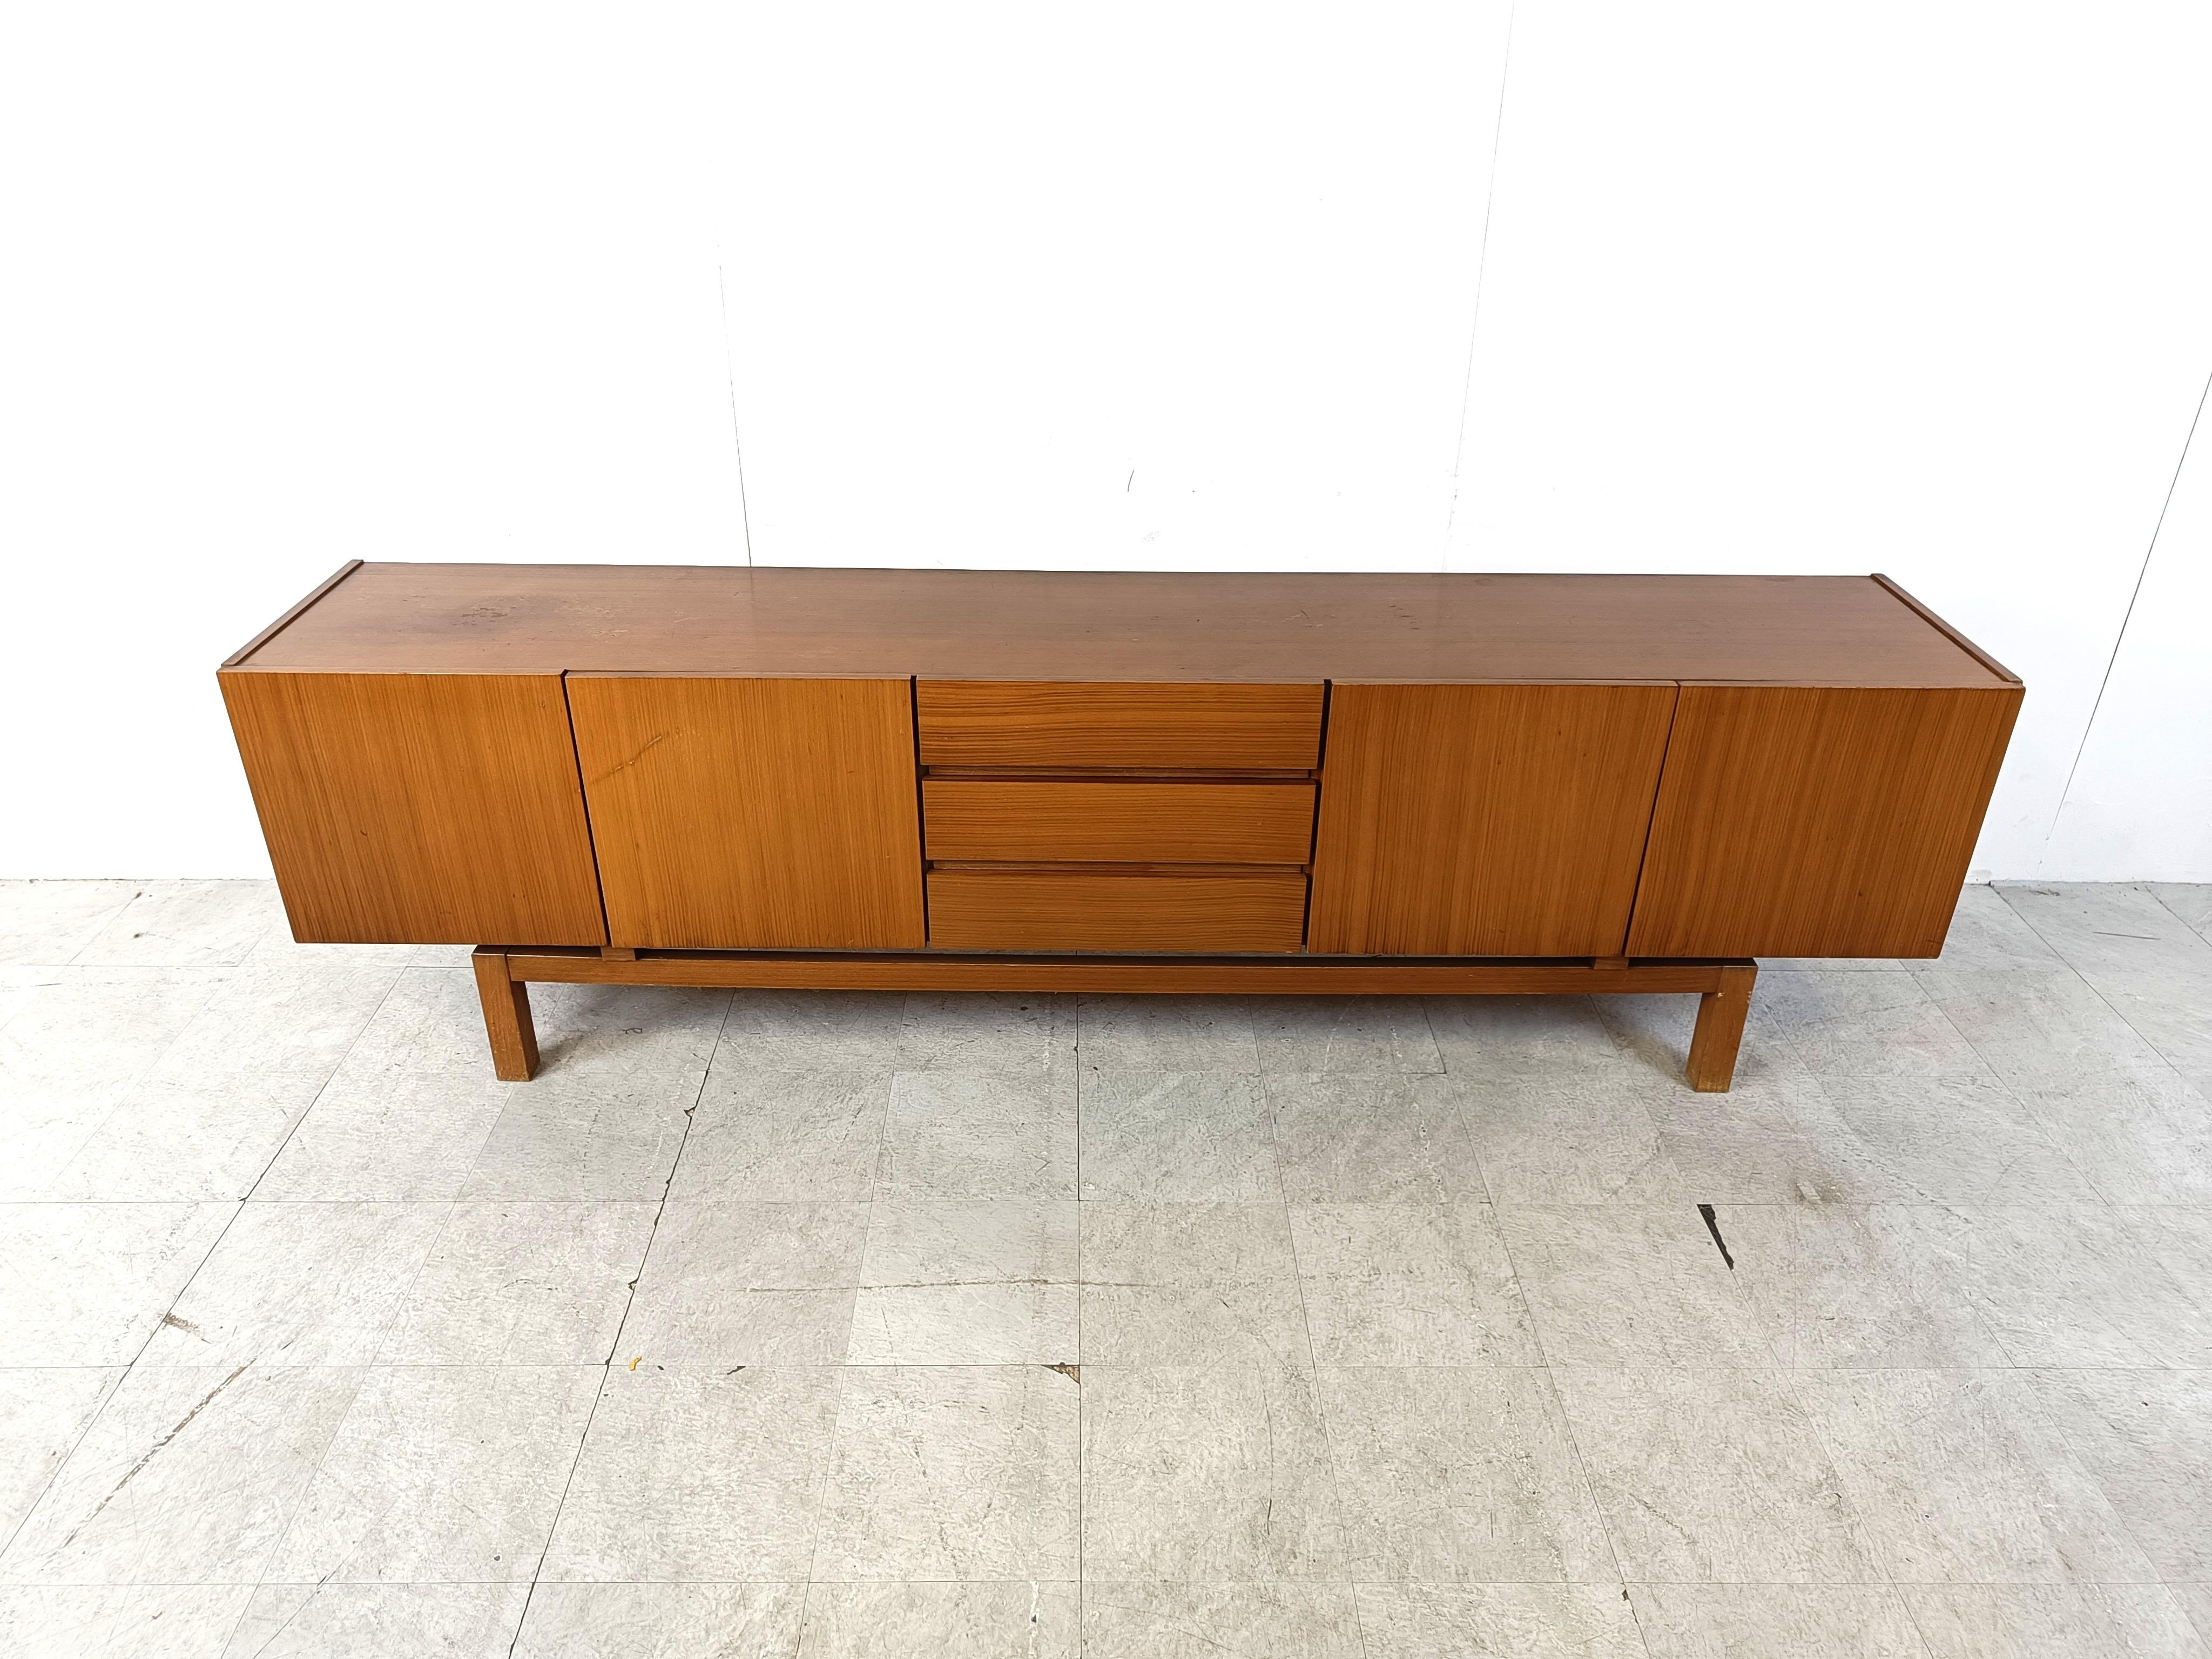 Mid century sideboard made in germany.

Consisting of 4 doors and 3 drawers.

Elegant legs.

Good overall condition with normal age related wear

1960s - Germany

Very good condition

Dimensions:
Lenght: 250cm
Height: 74cm
Depth: 45cm

Ref.: 859884